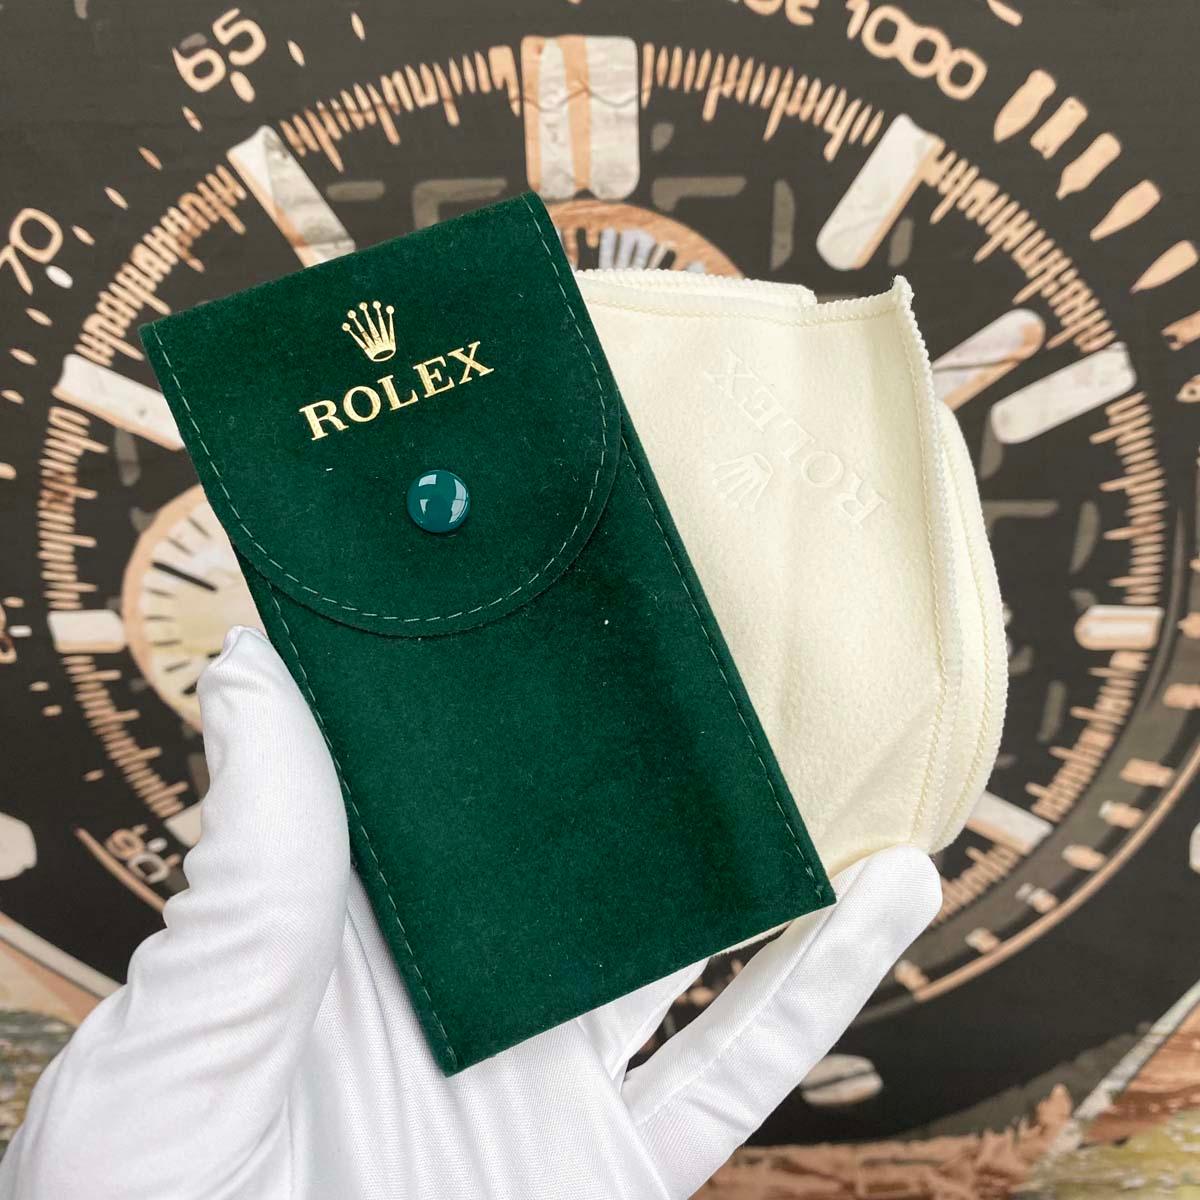 Rolex Hang Tags Bulk Order or Pouch and Polishing Cloth - Gotham Trading 